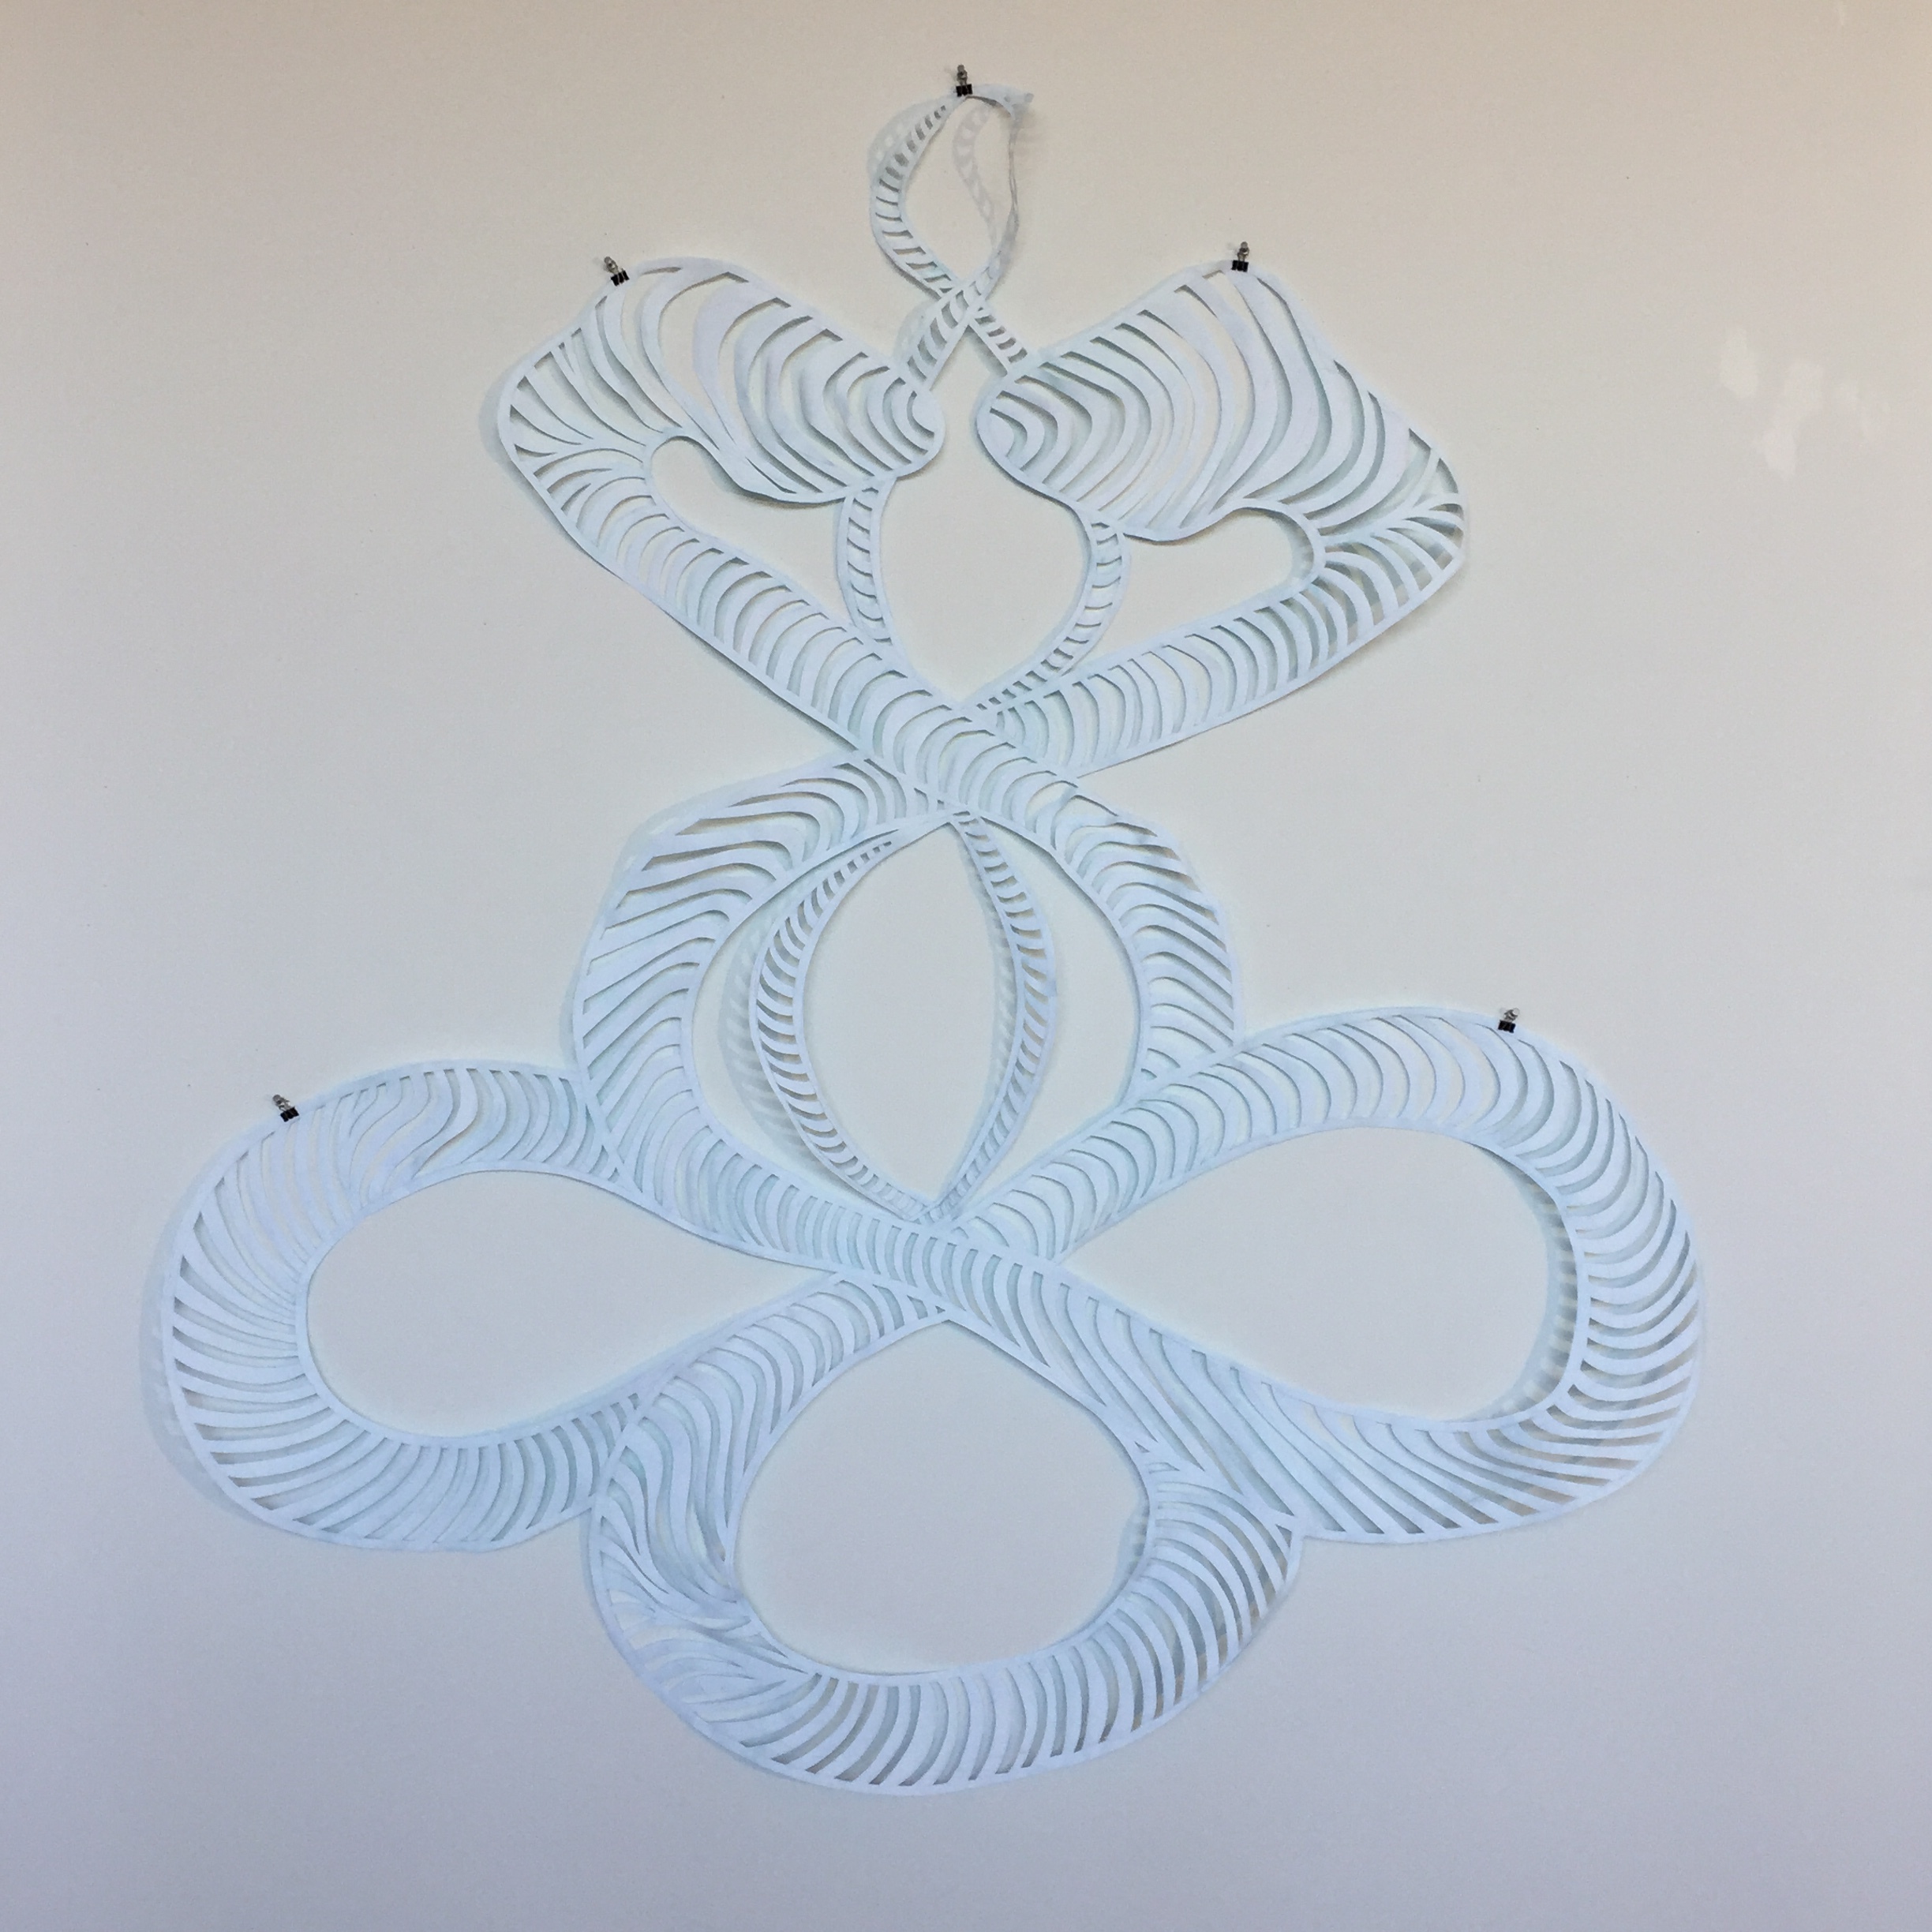 Double Helix Snakes, 2017, watercolor and Flashe on cut paper, 60 x 69 inches